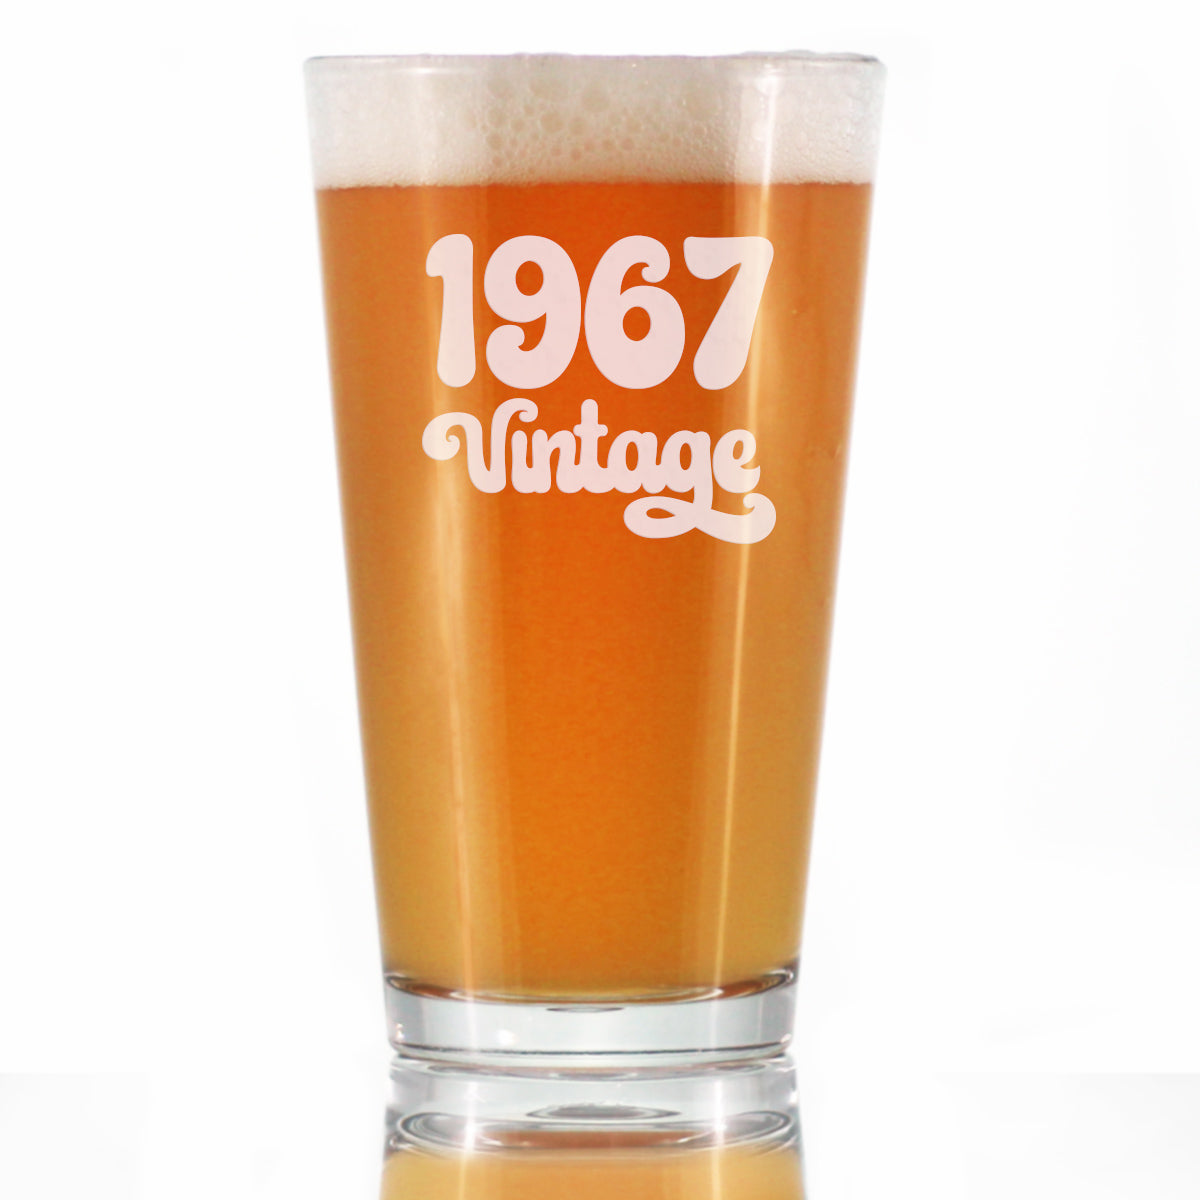 Vintage 1967 - Pint Glass for Beer - 56th Birthday Gifts for Men or Women Turning 56 - Fun Bday Party Decor - 16 oz